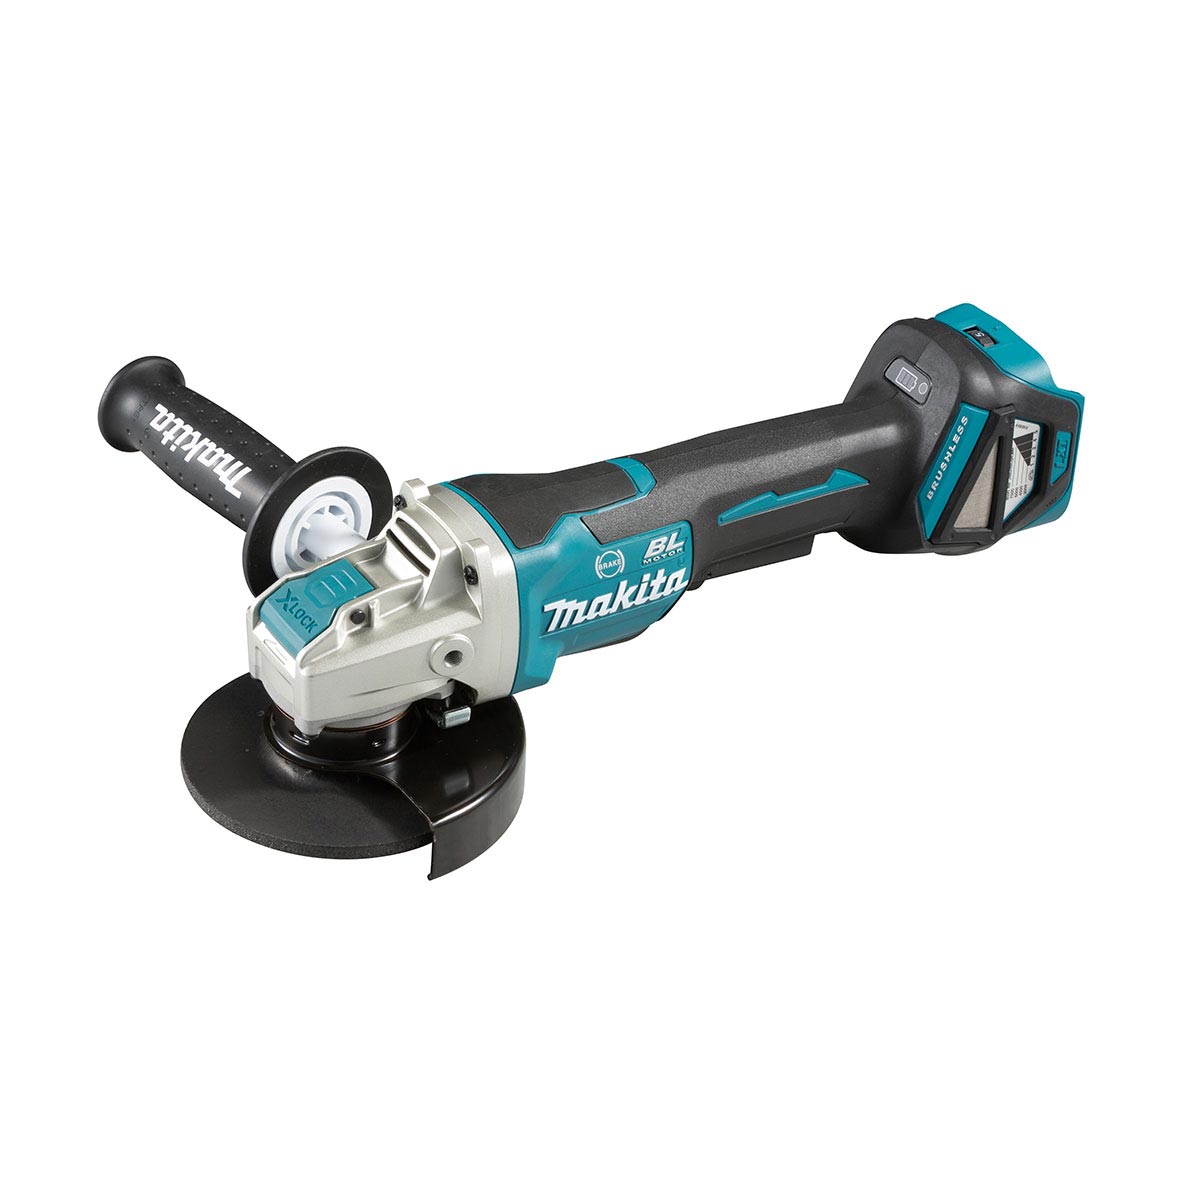 18V 125mm Brushless X-Lock Angle Grinder Bare (Tool Only) DGA519Z by Makita